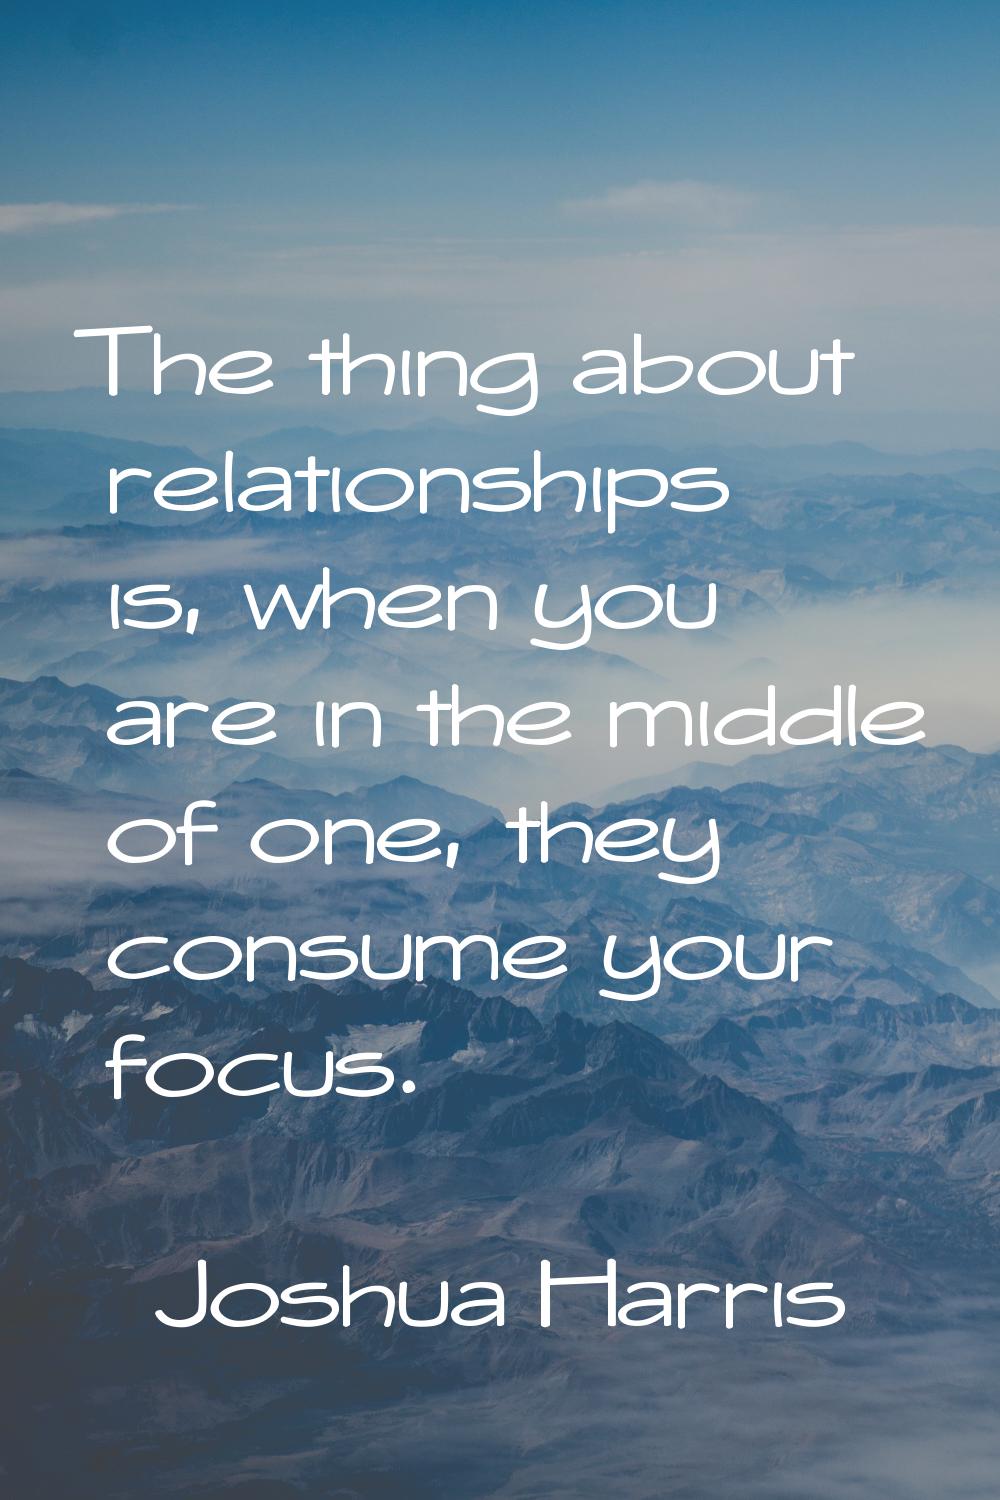 The thing about relationships is, when you are in the middle of one, they consume your focus.